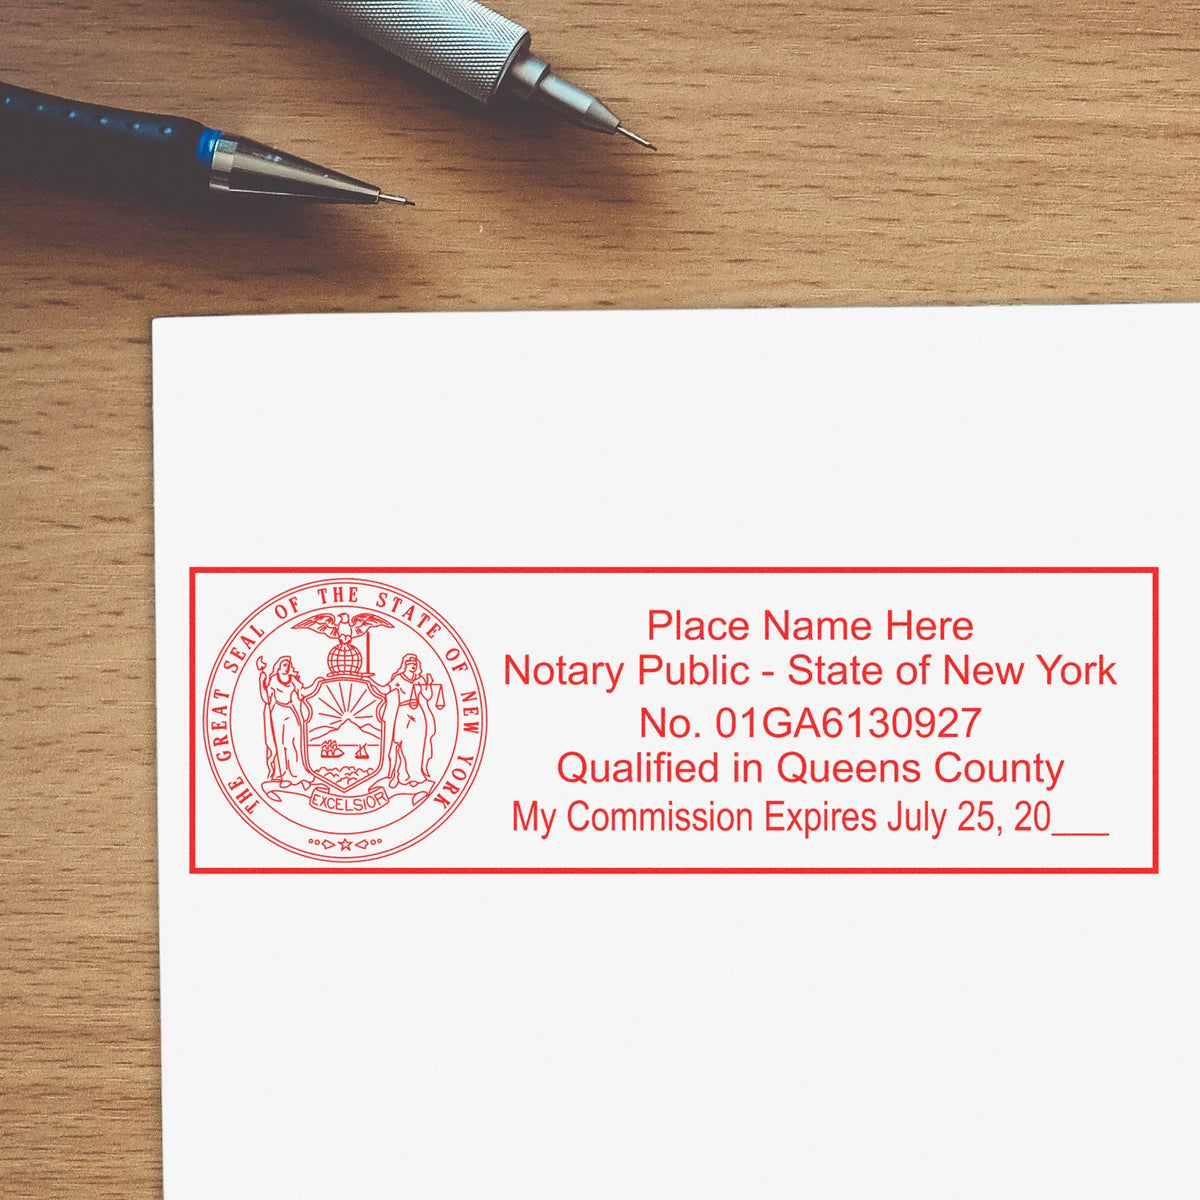 The Heavy-Duty New York Rectangular Notary Stamp stamp impression comes to life with a crisp, detailed photo on paper - showcasing true professional quality.